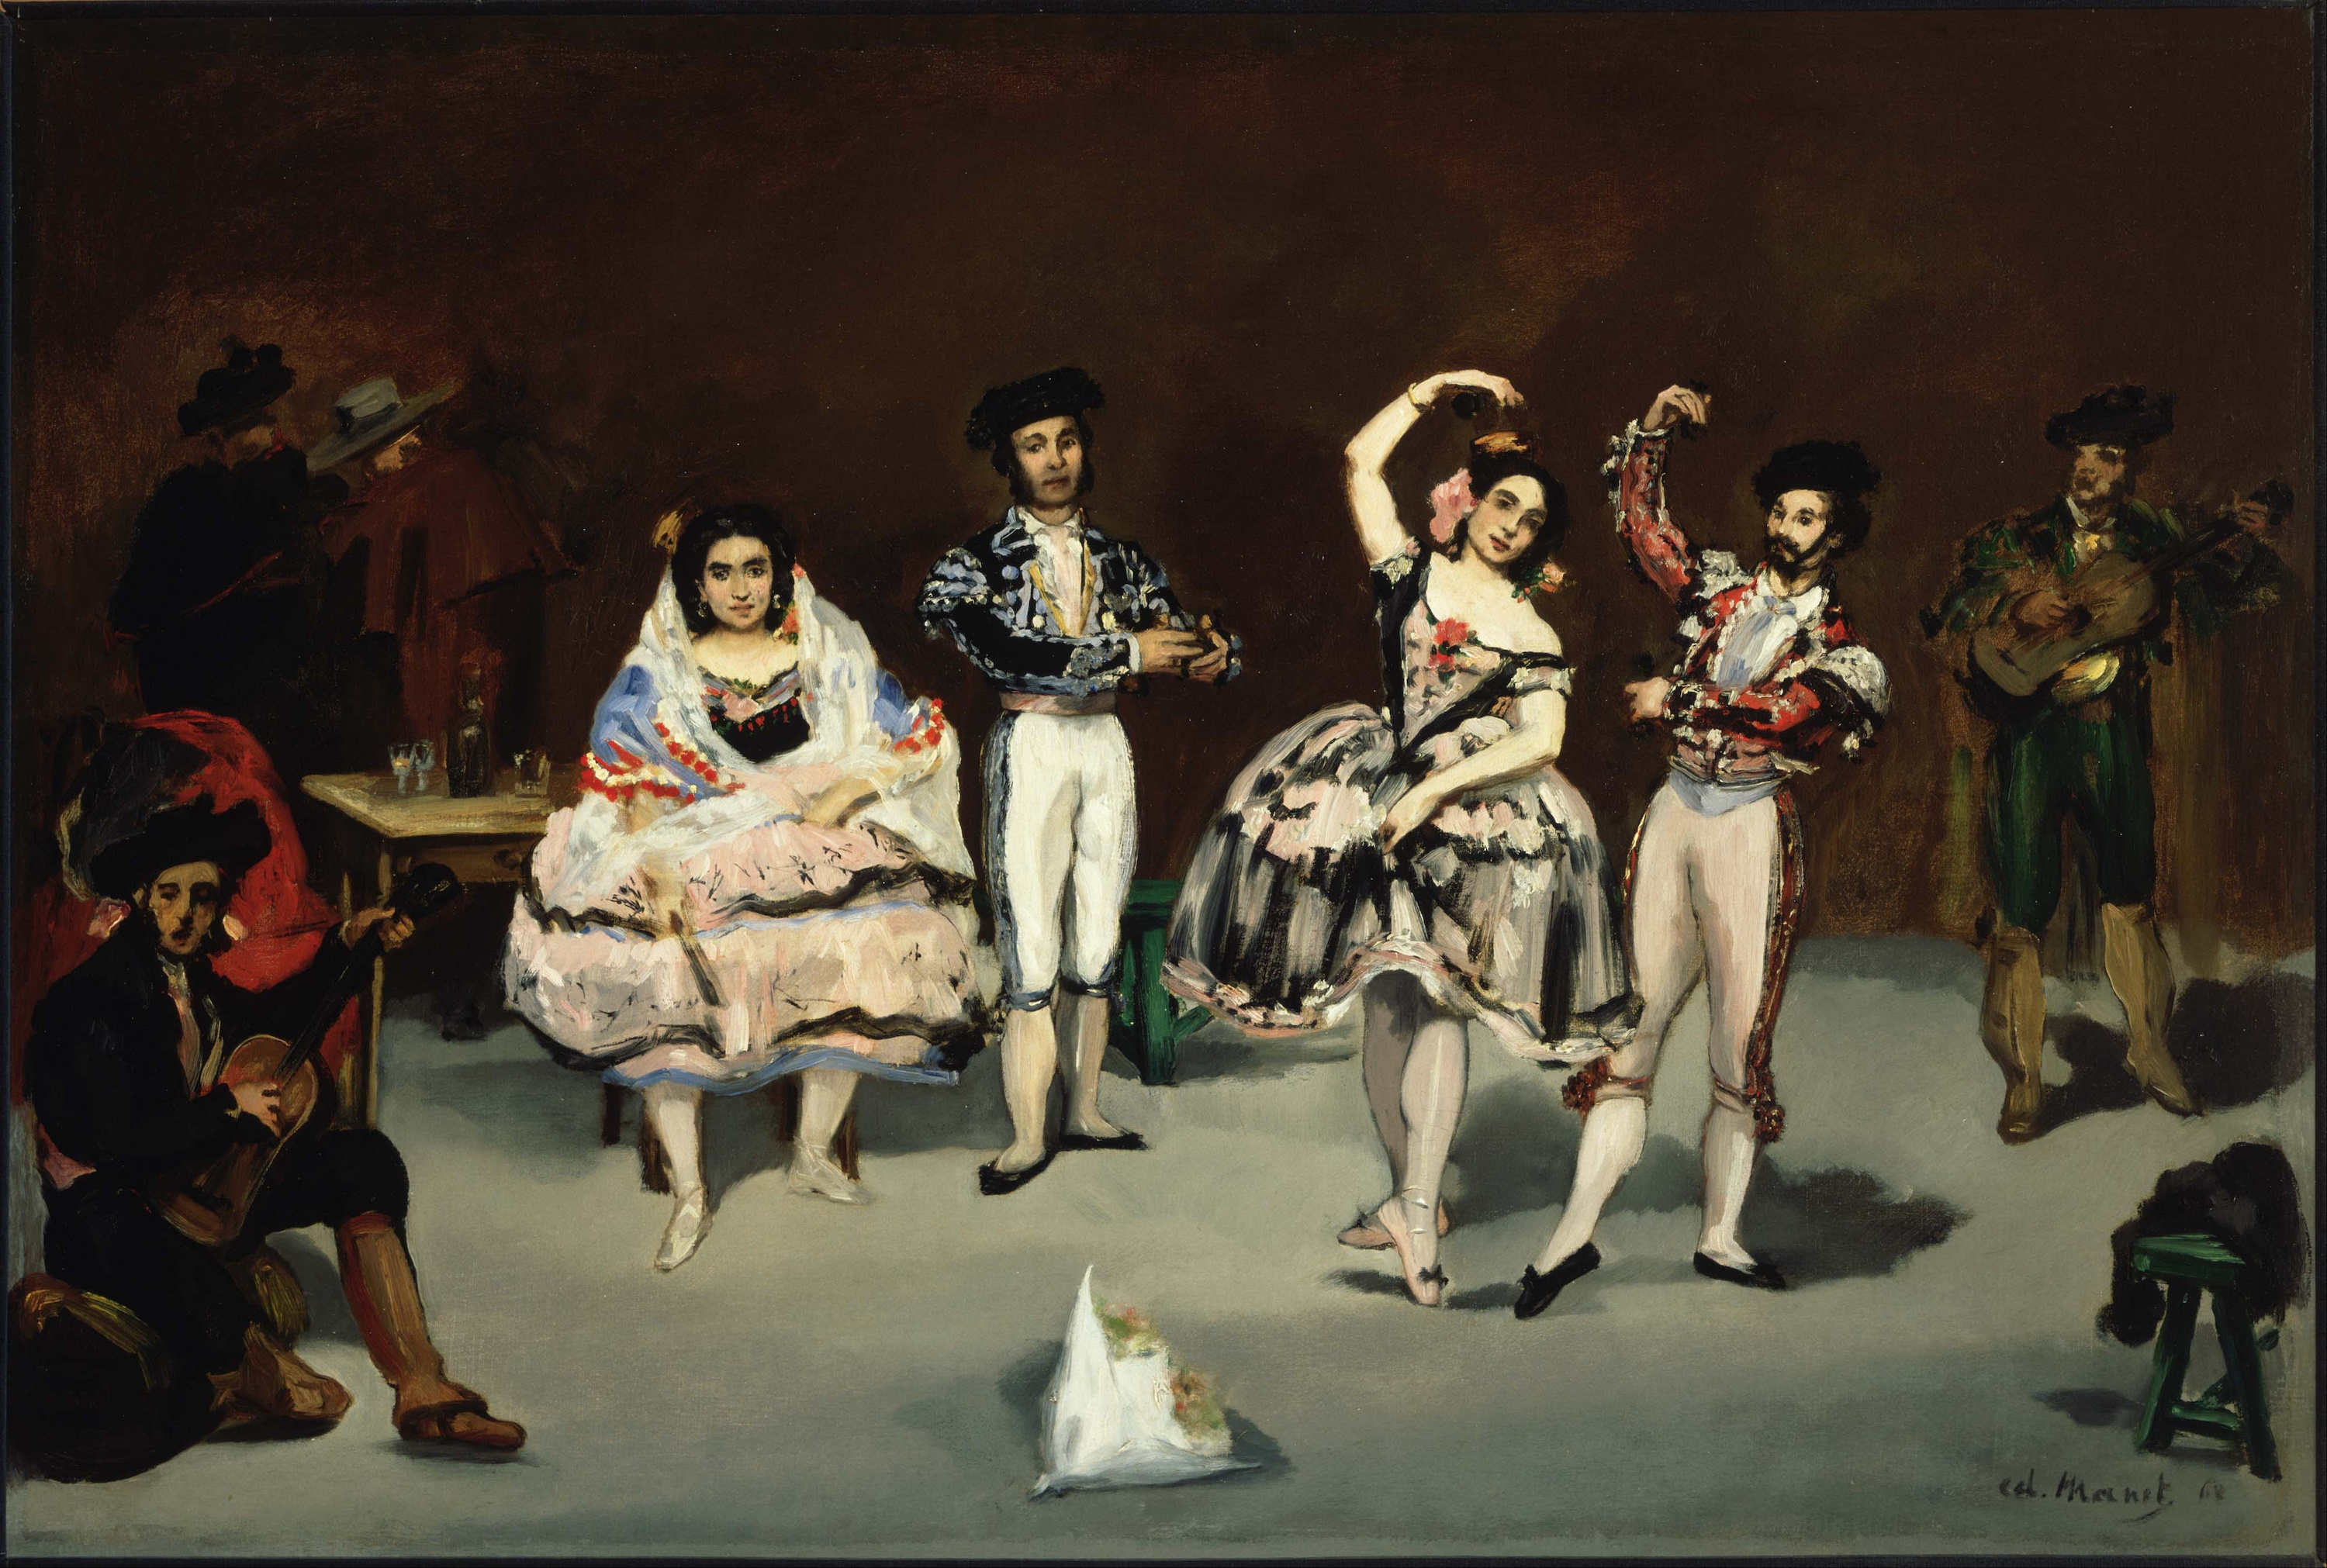 Spanish Ballet by Édouard Manet - 1862 - 35.63 x 24 in The Phillips Collection